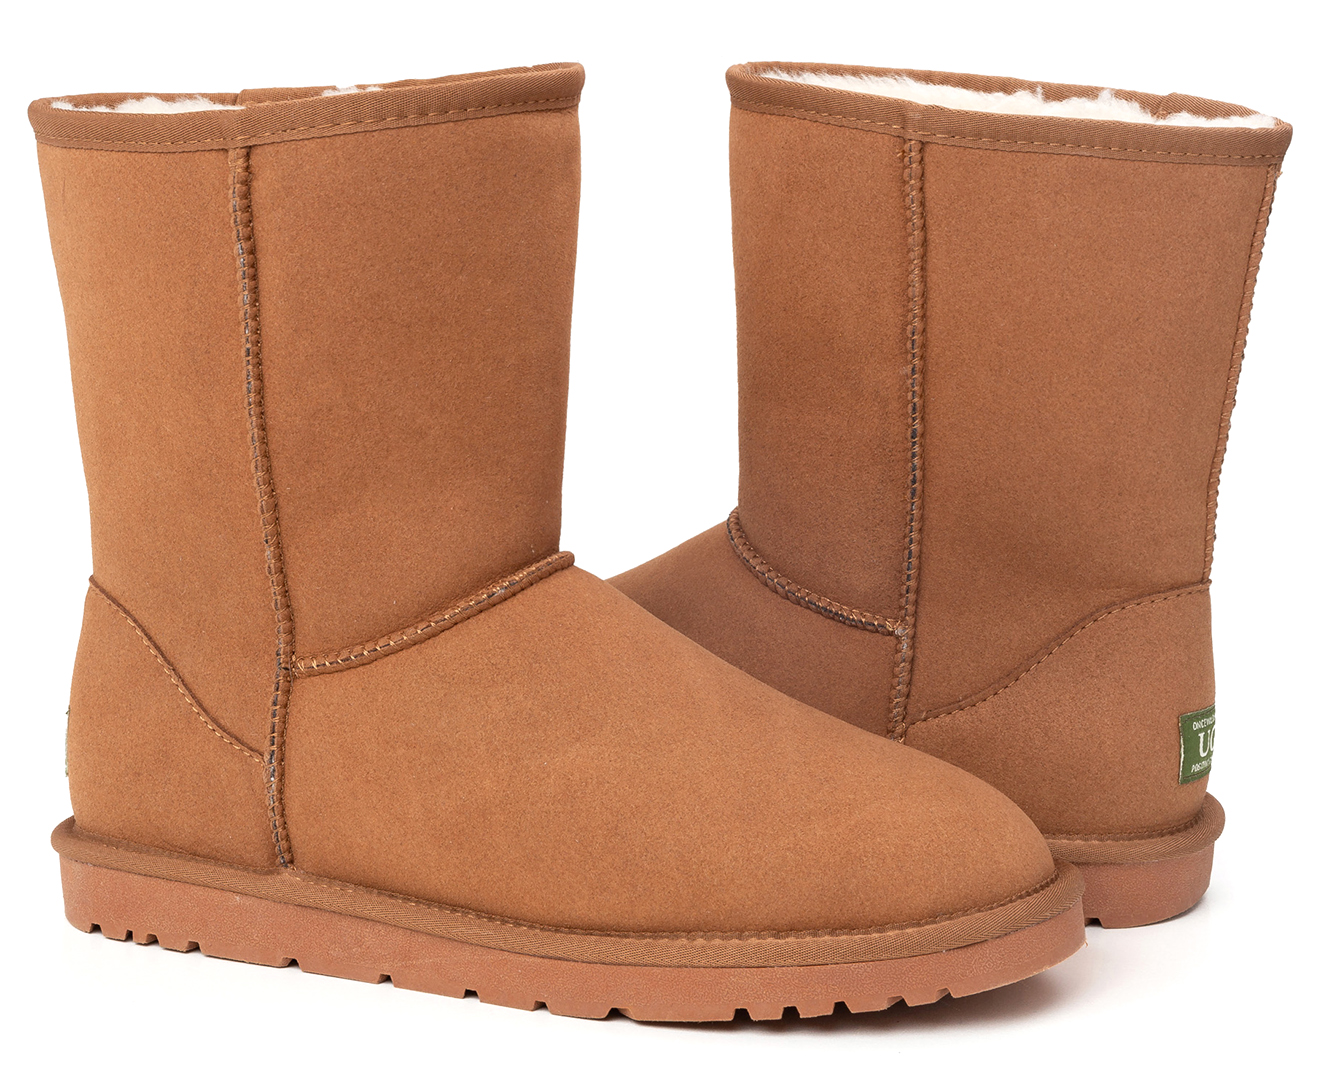 grosby ugg boots review